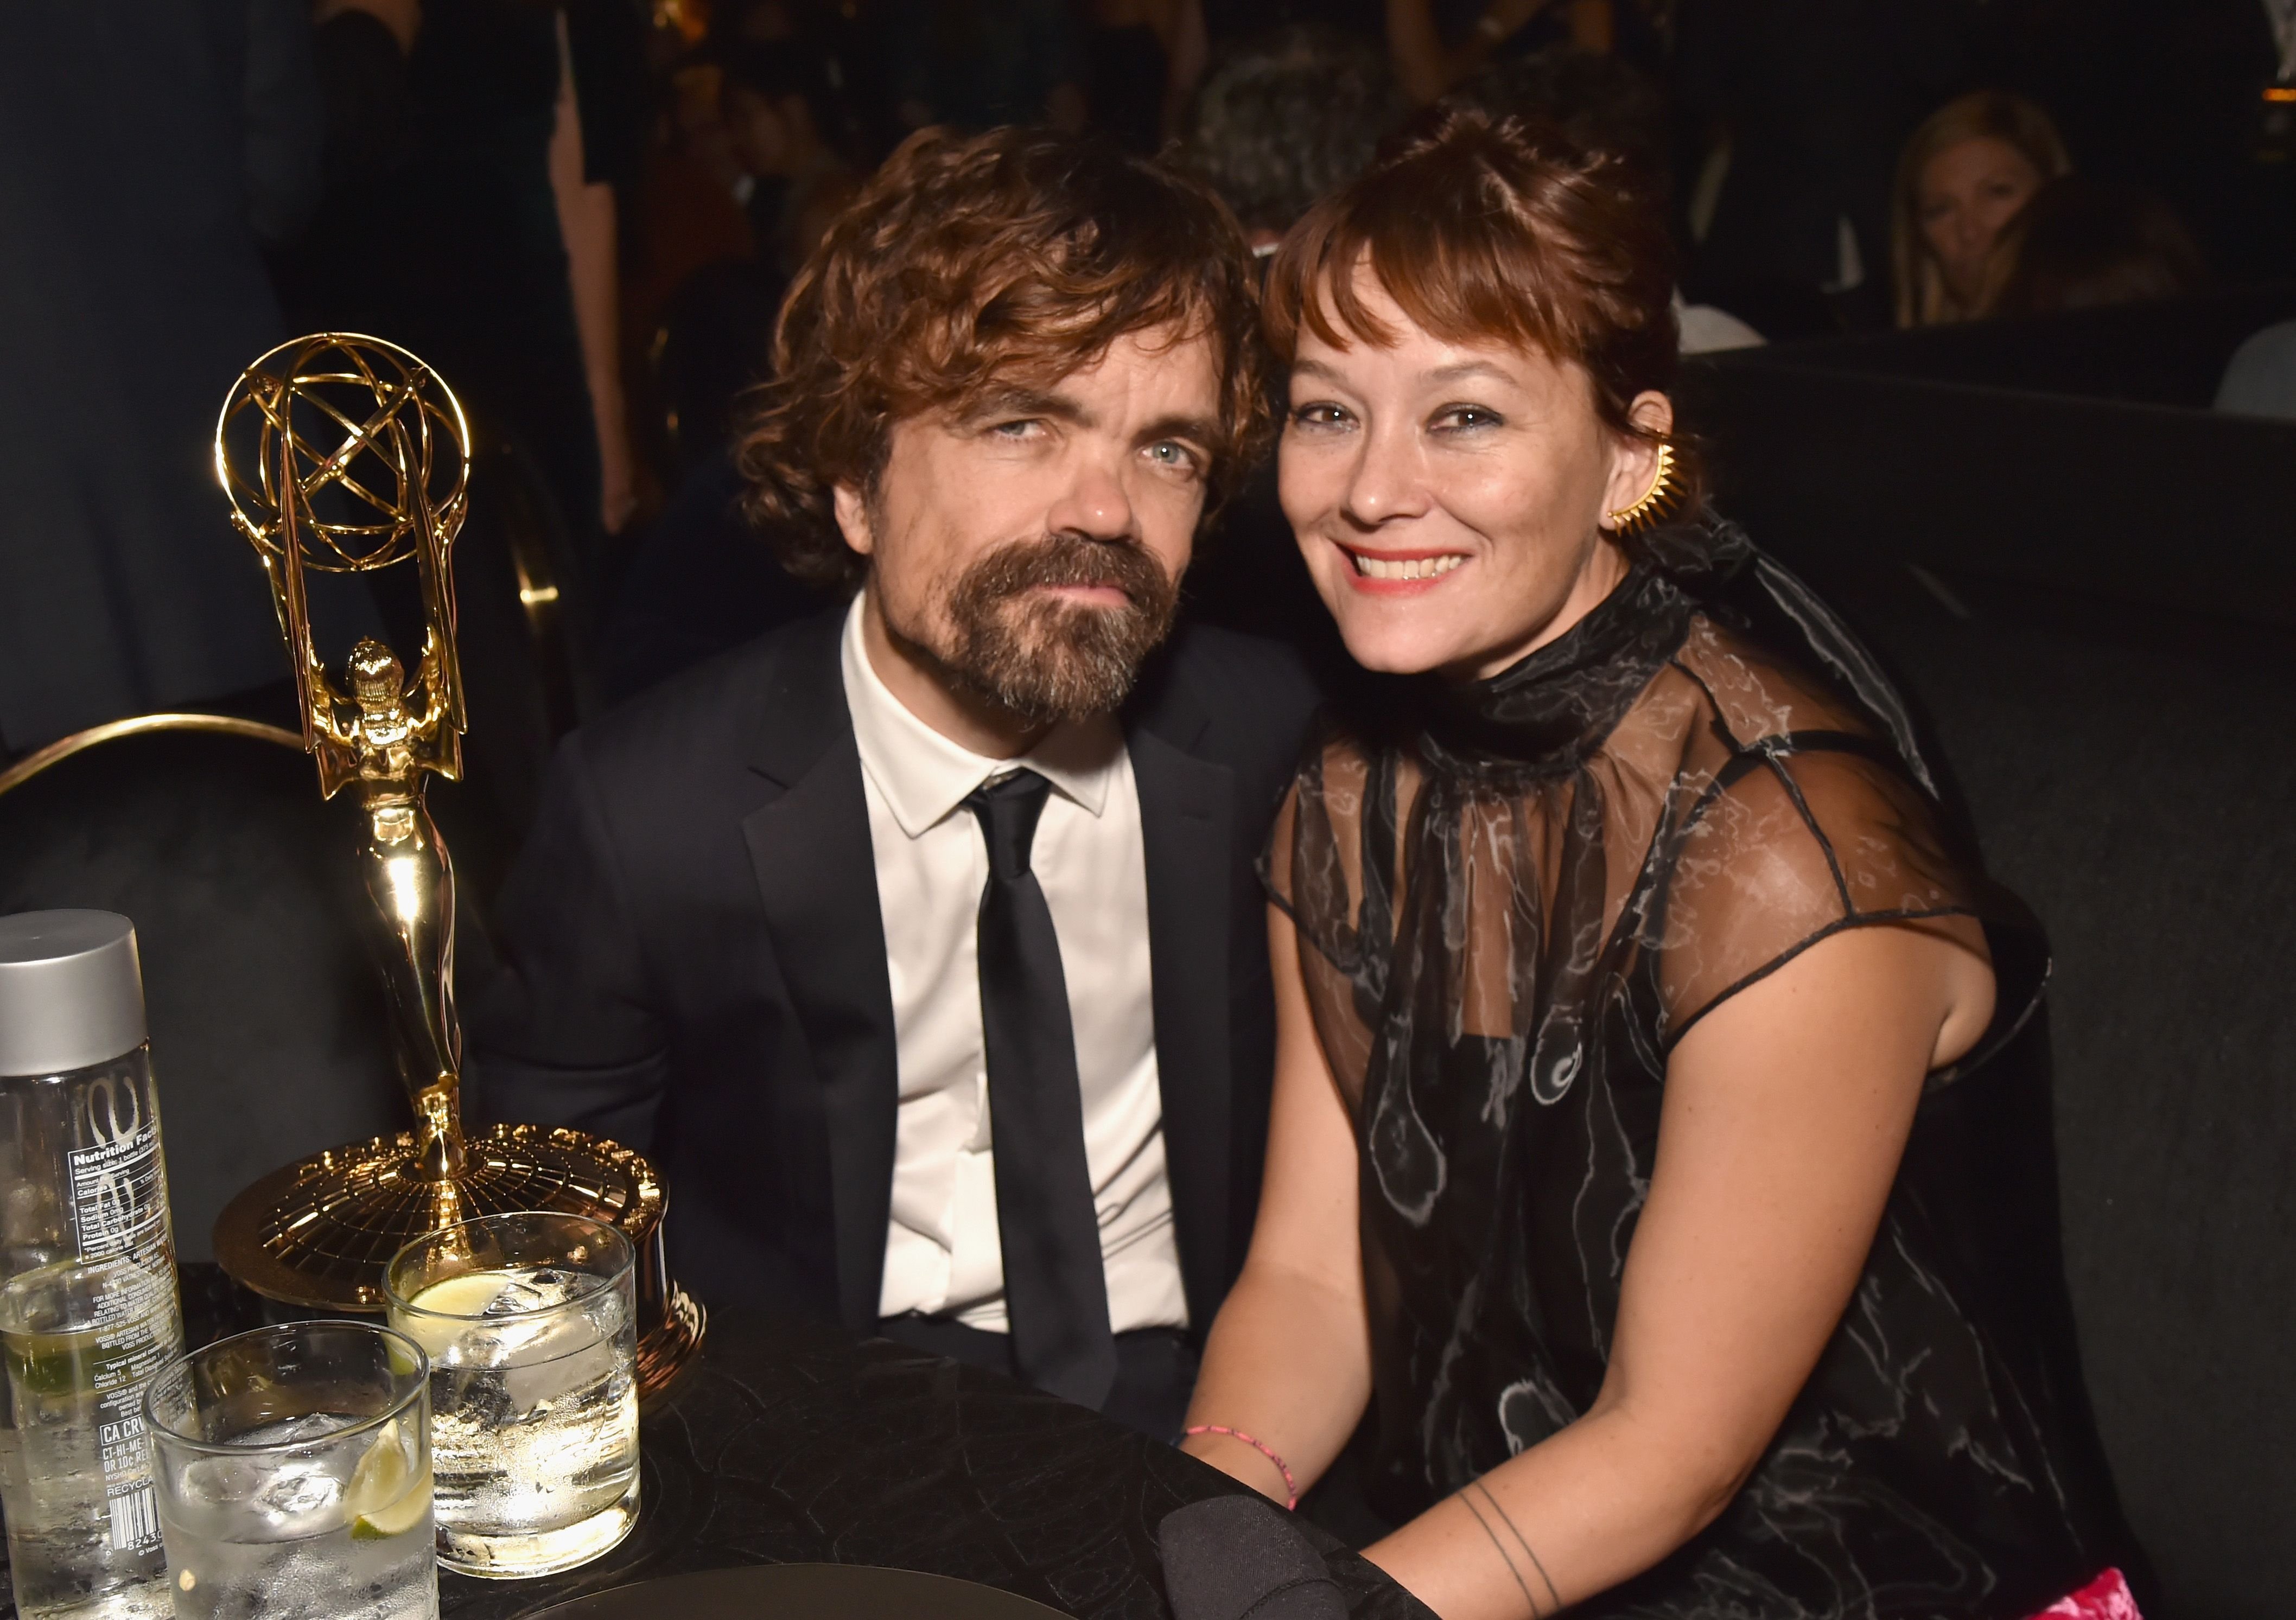 Peter Dinklage and Erica Schmidt at THE HBO Official 2018 Emmy After Party in Los Angeles, California | Source: Getty Images